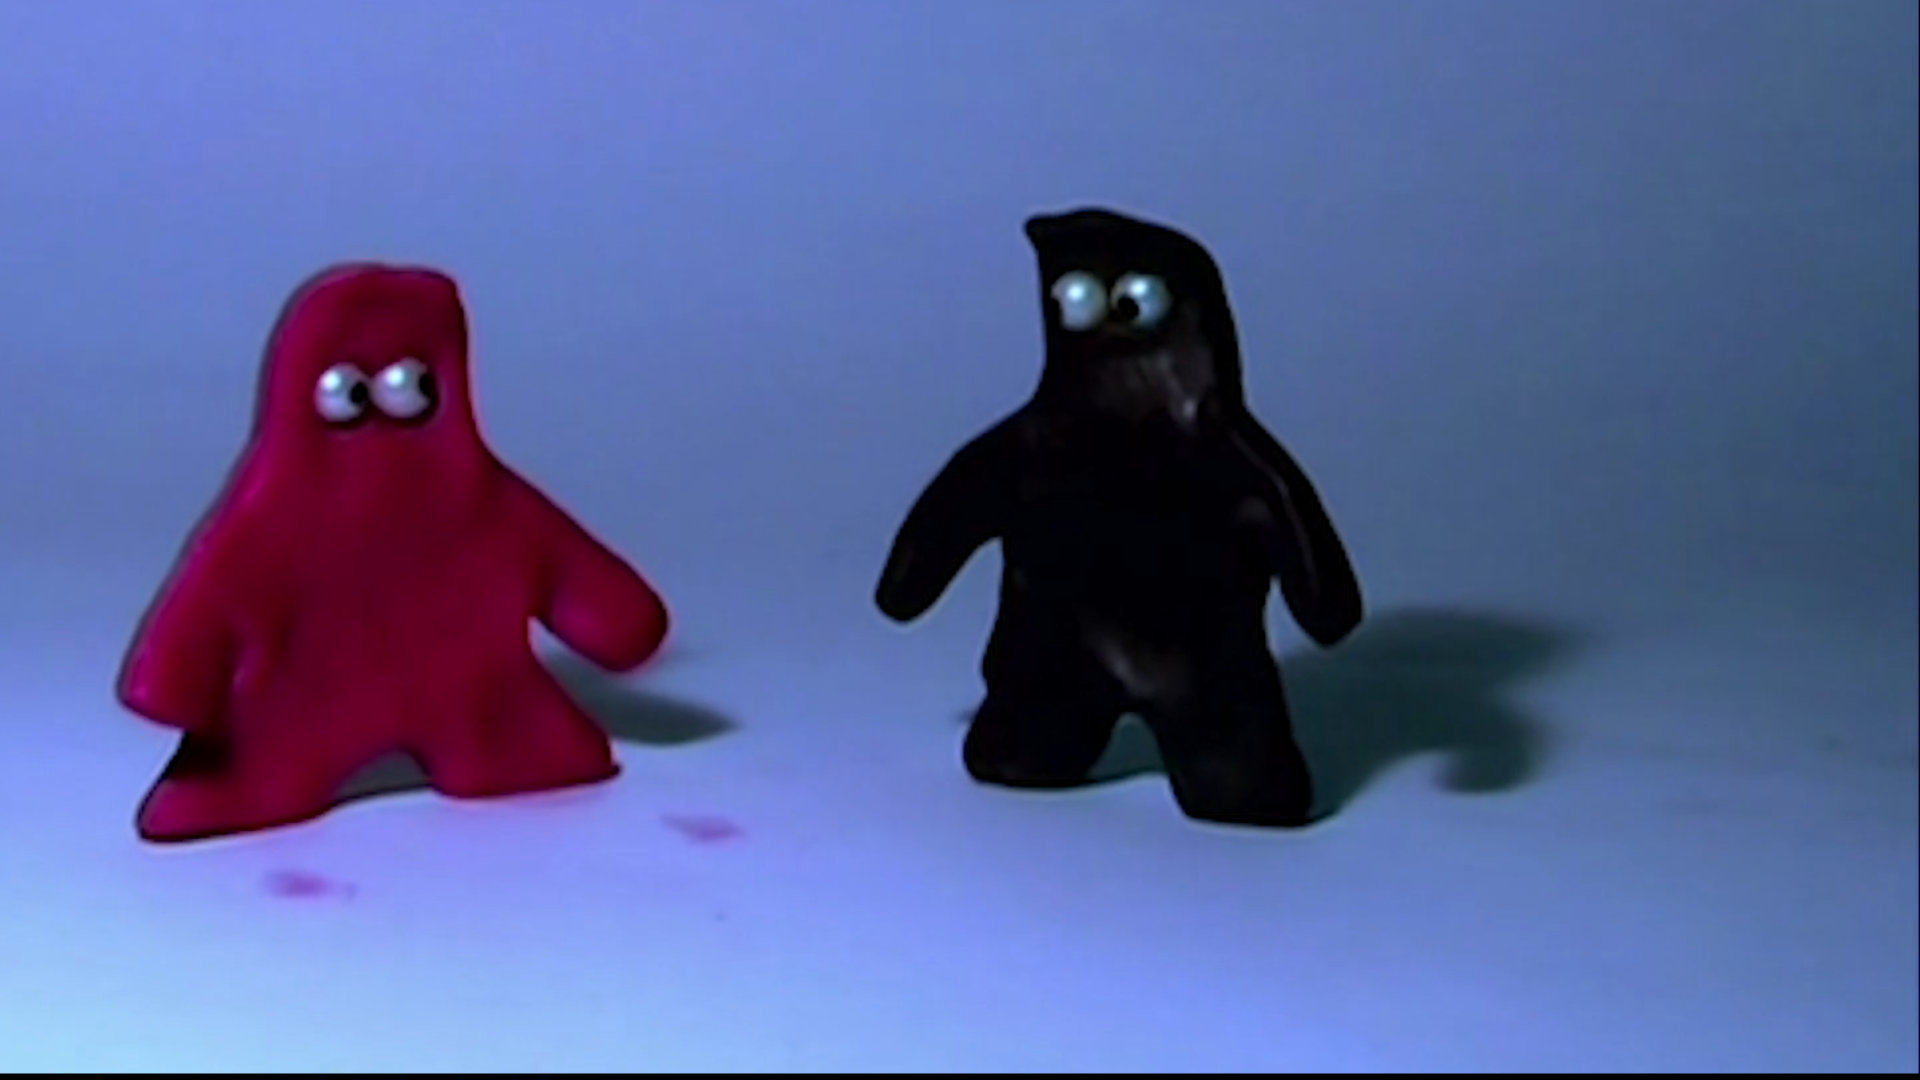 Two claymation characters against a blue background.